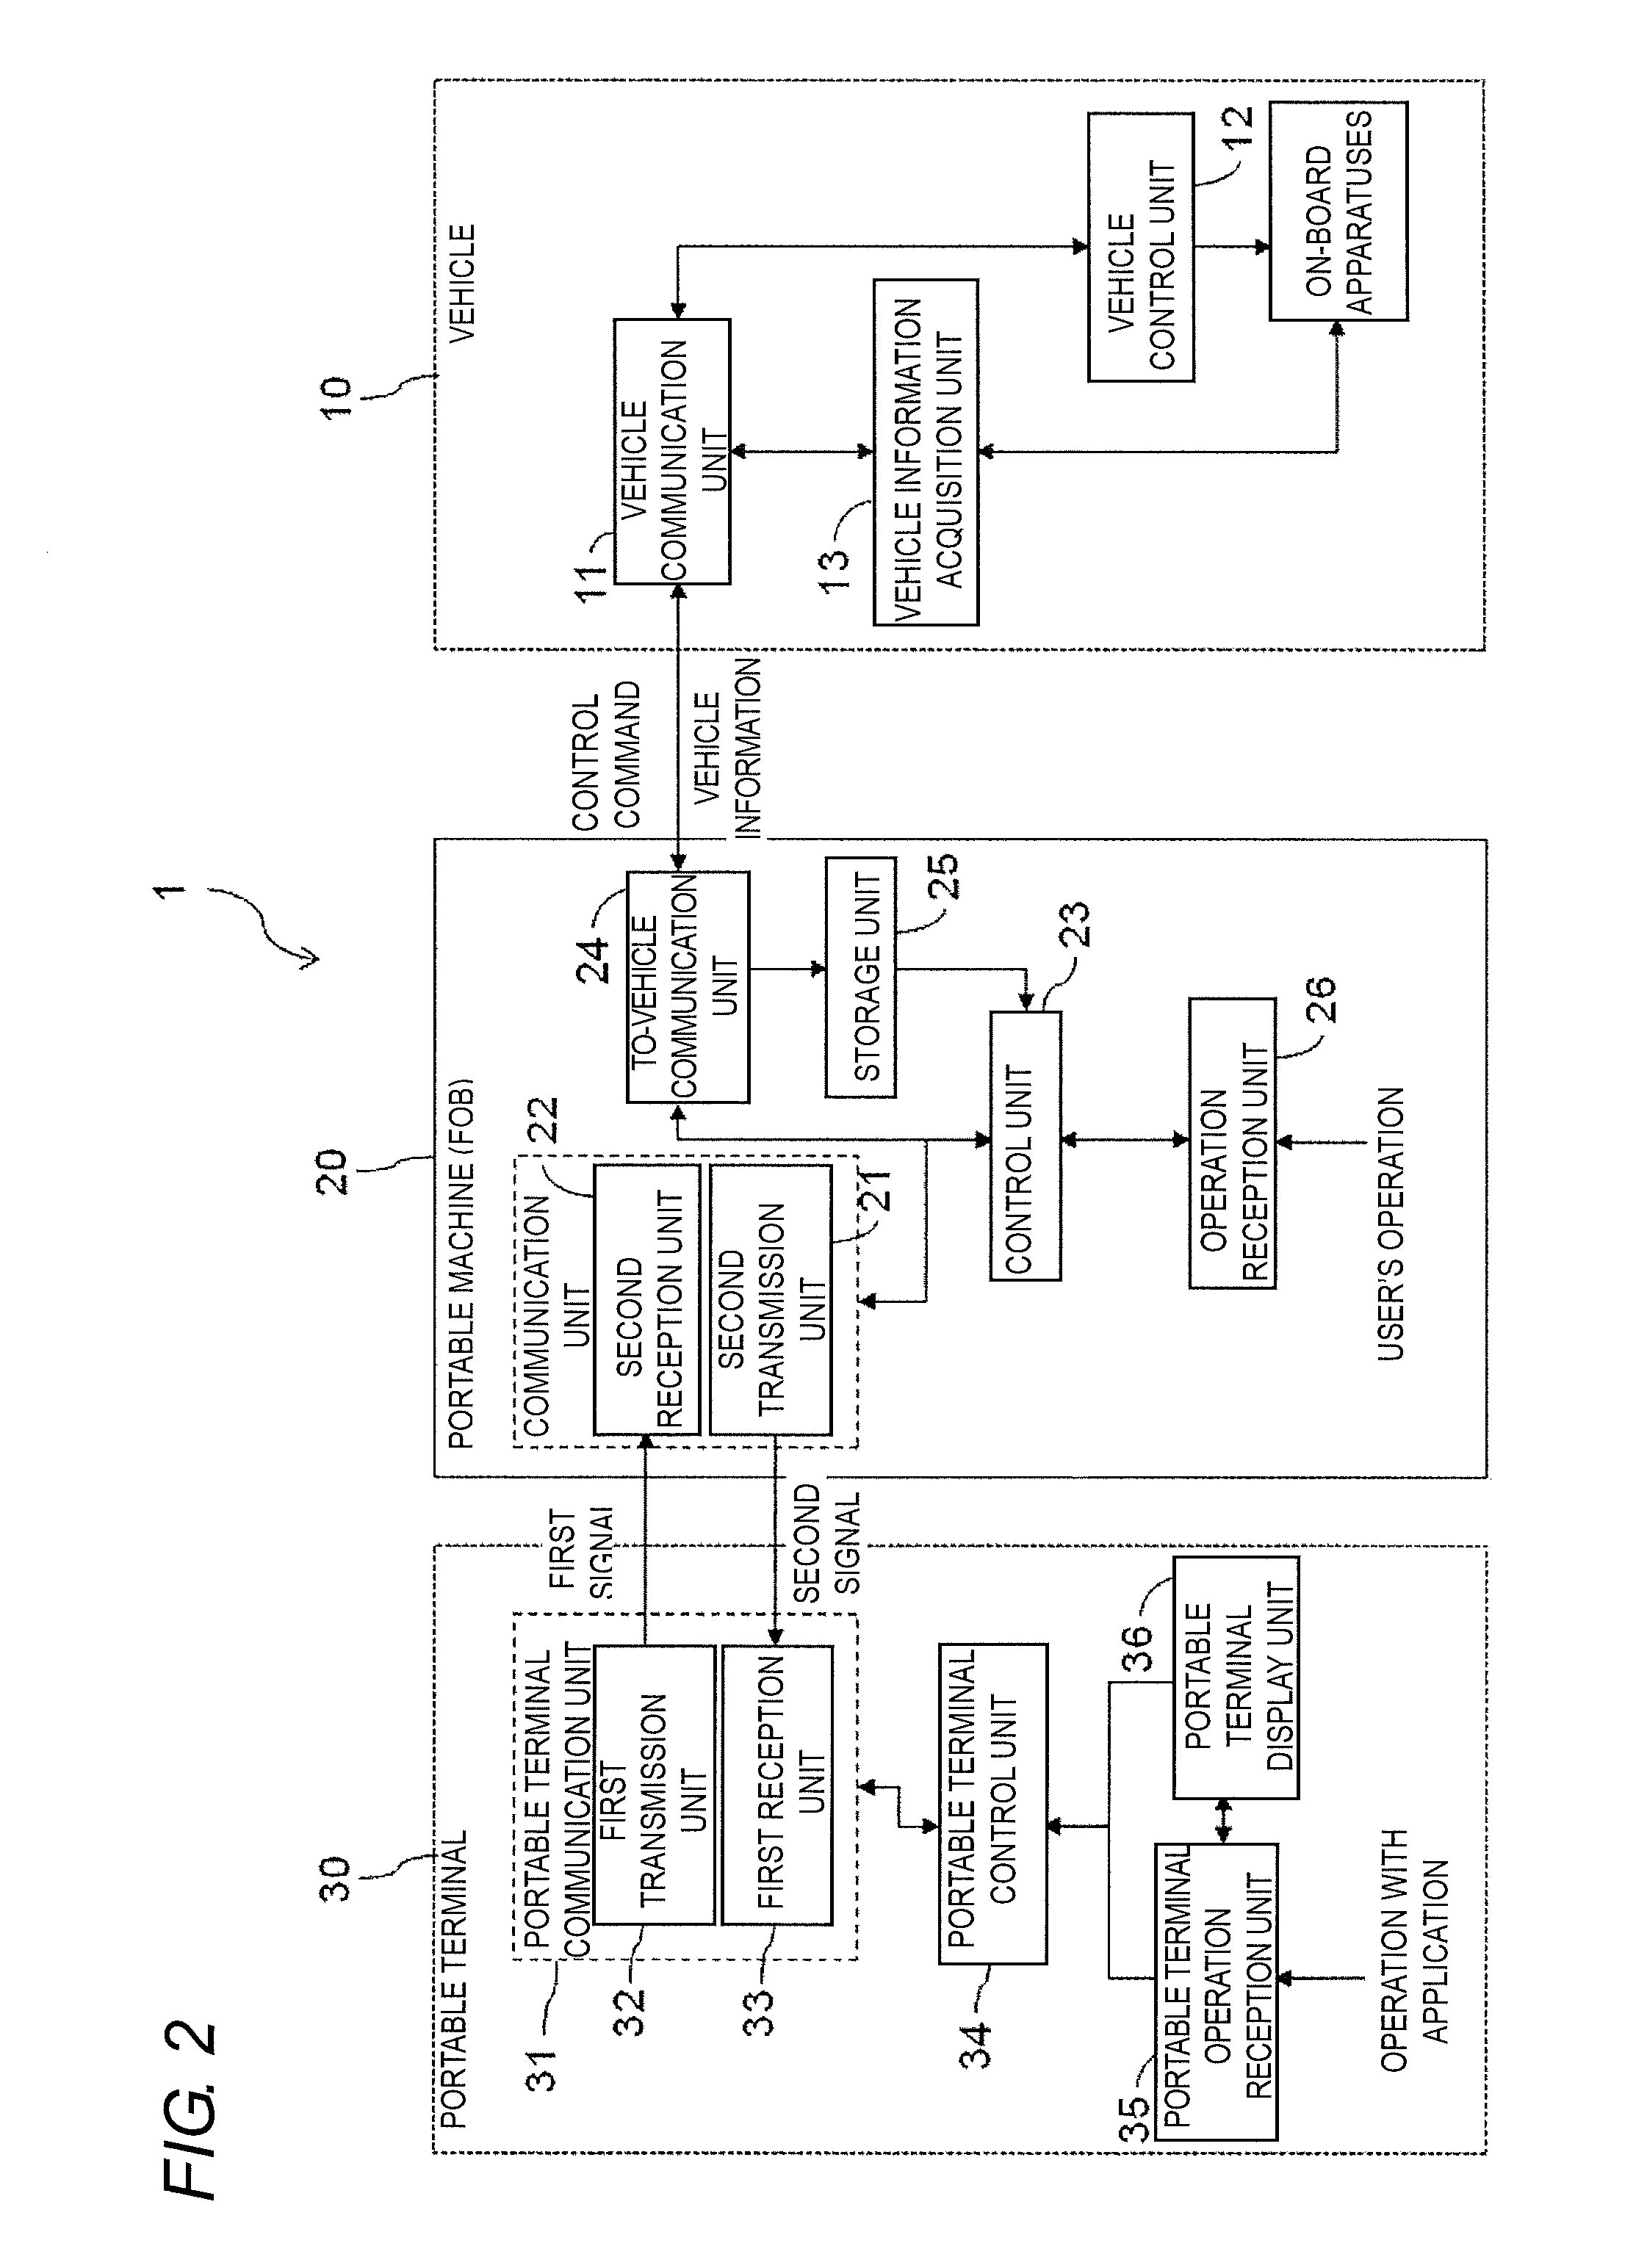 Communication system and portable machine